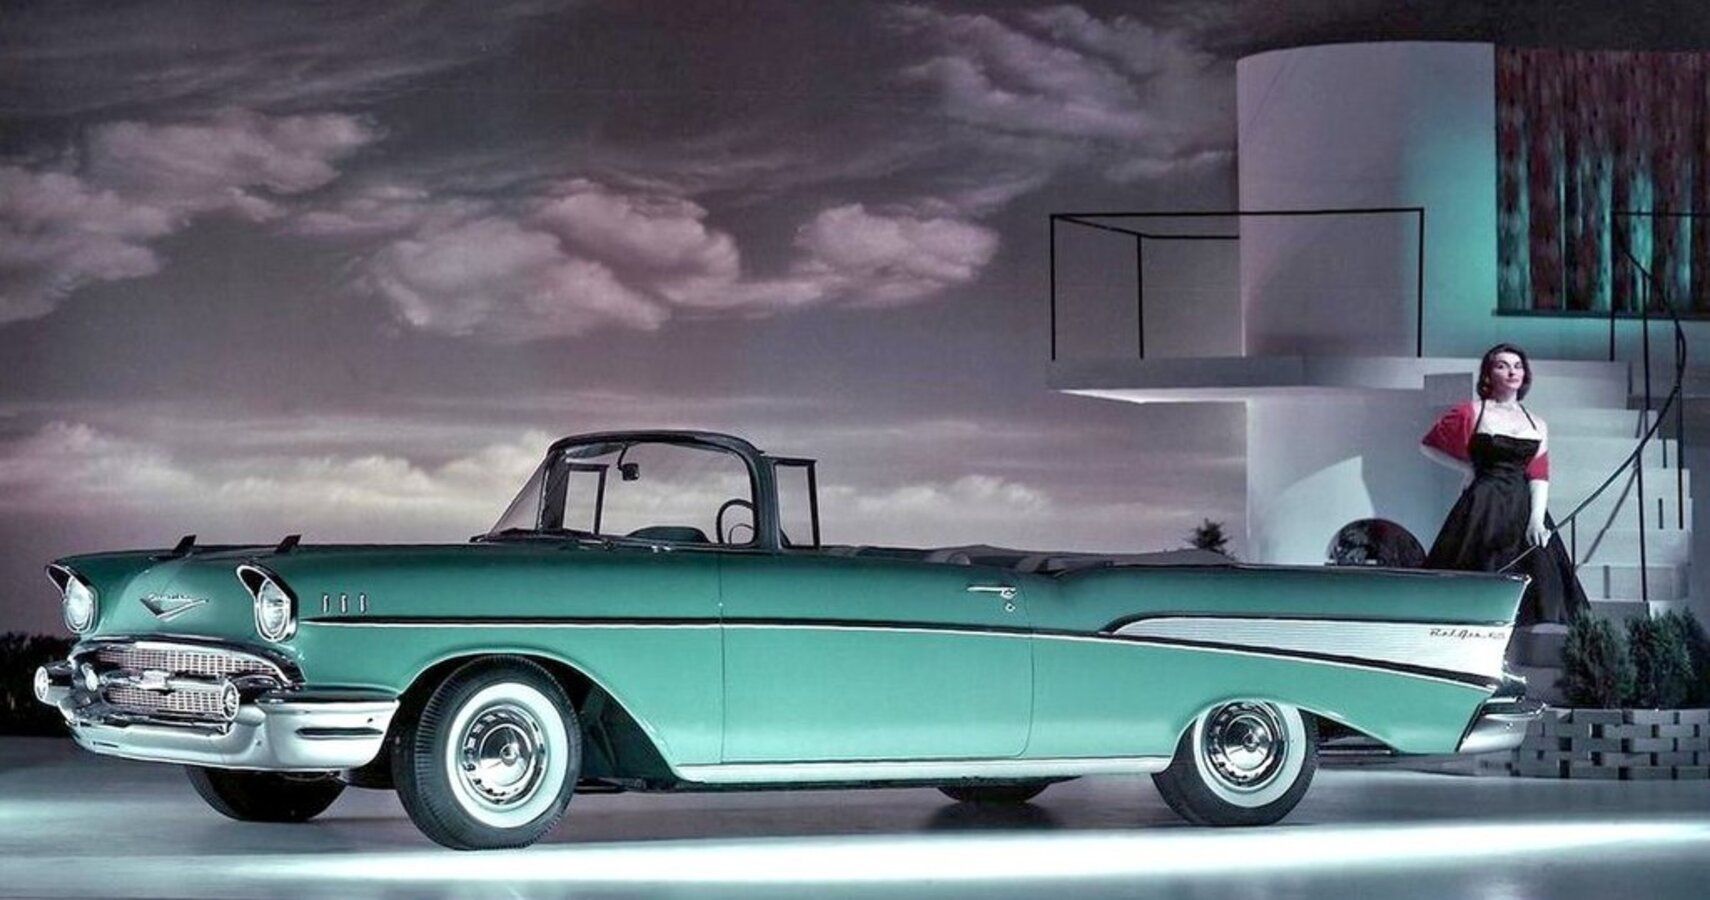 The Chevy Bel Air Classic